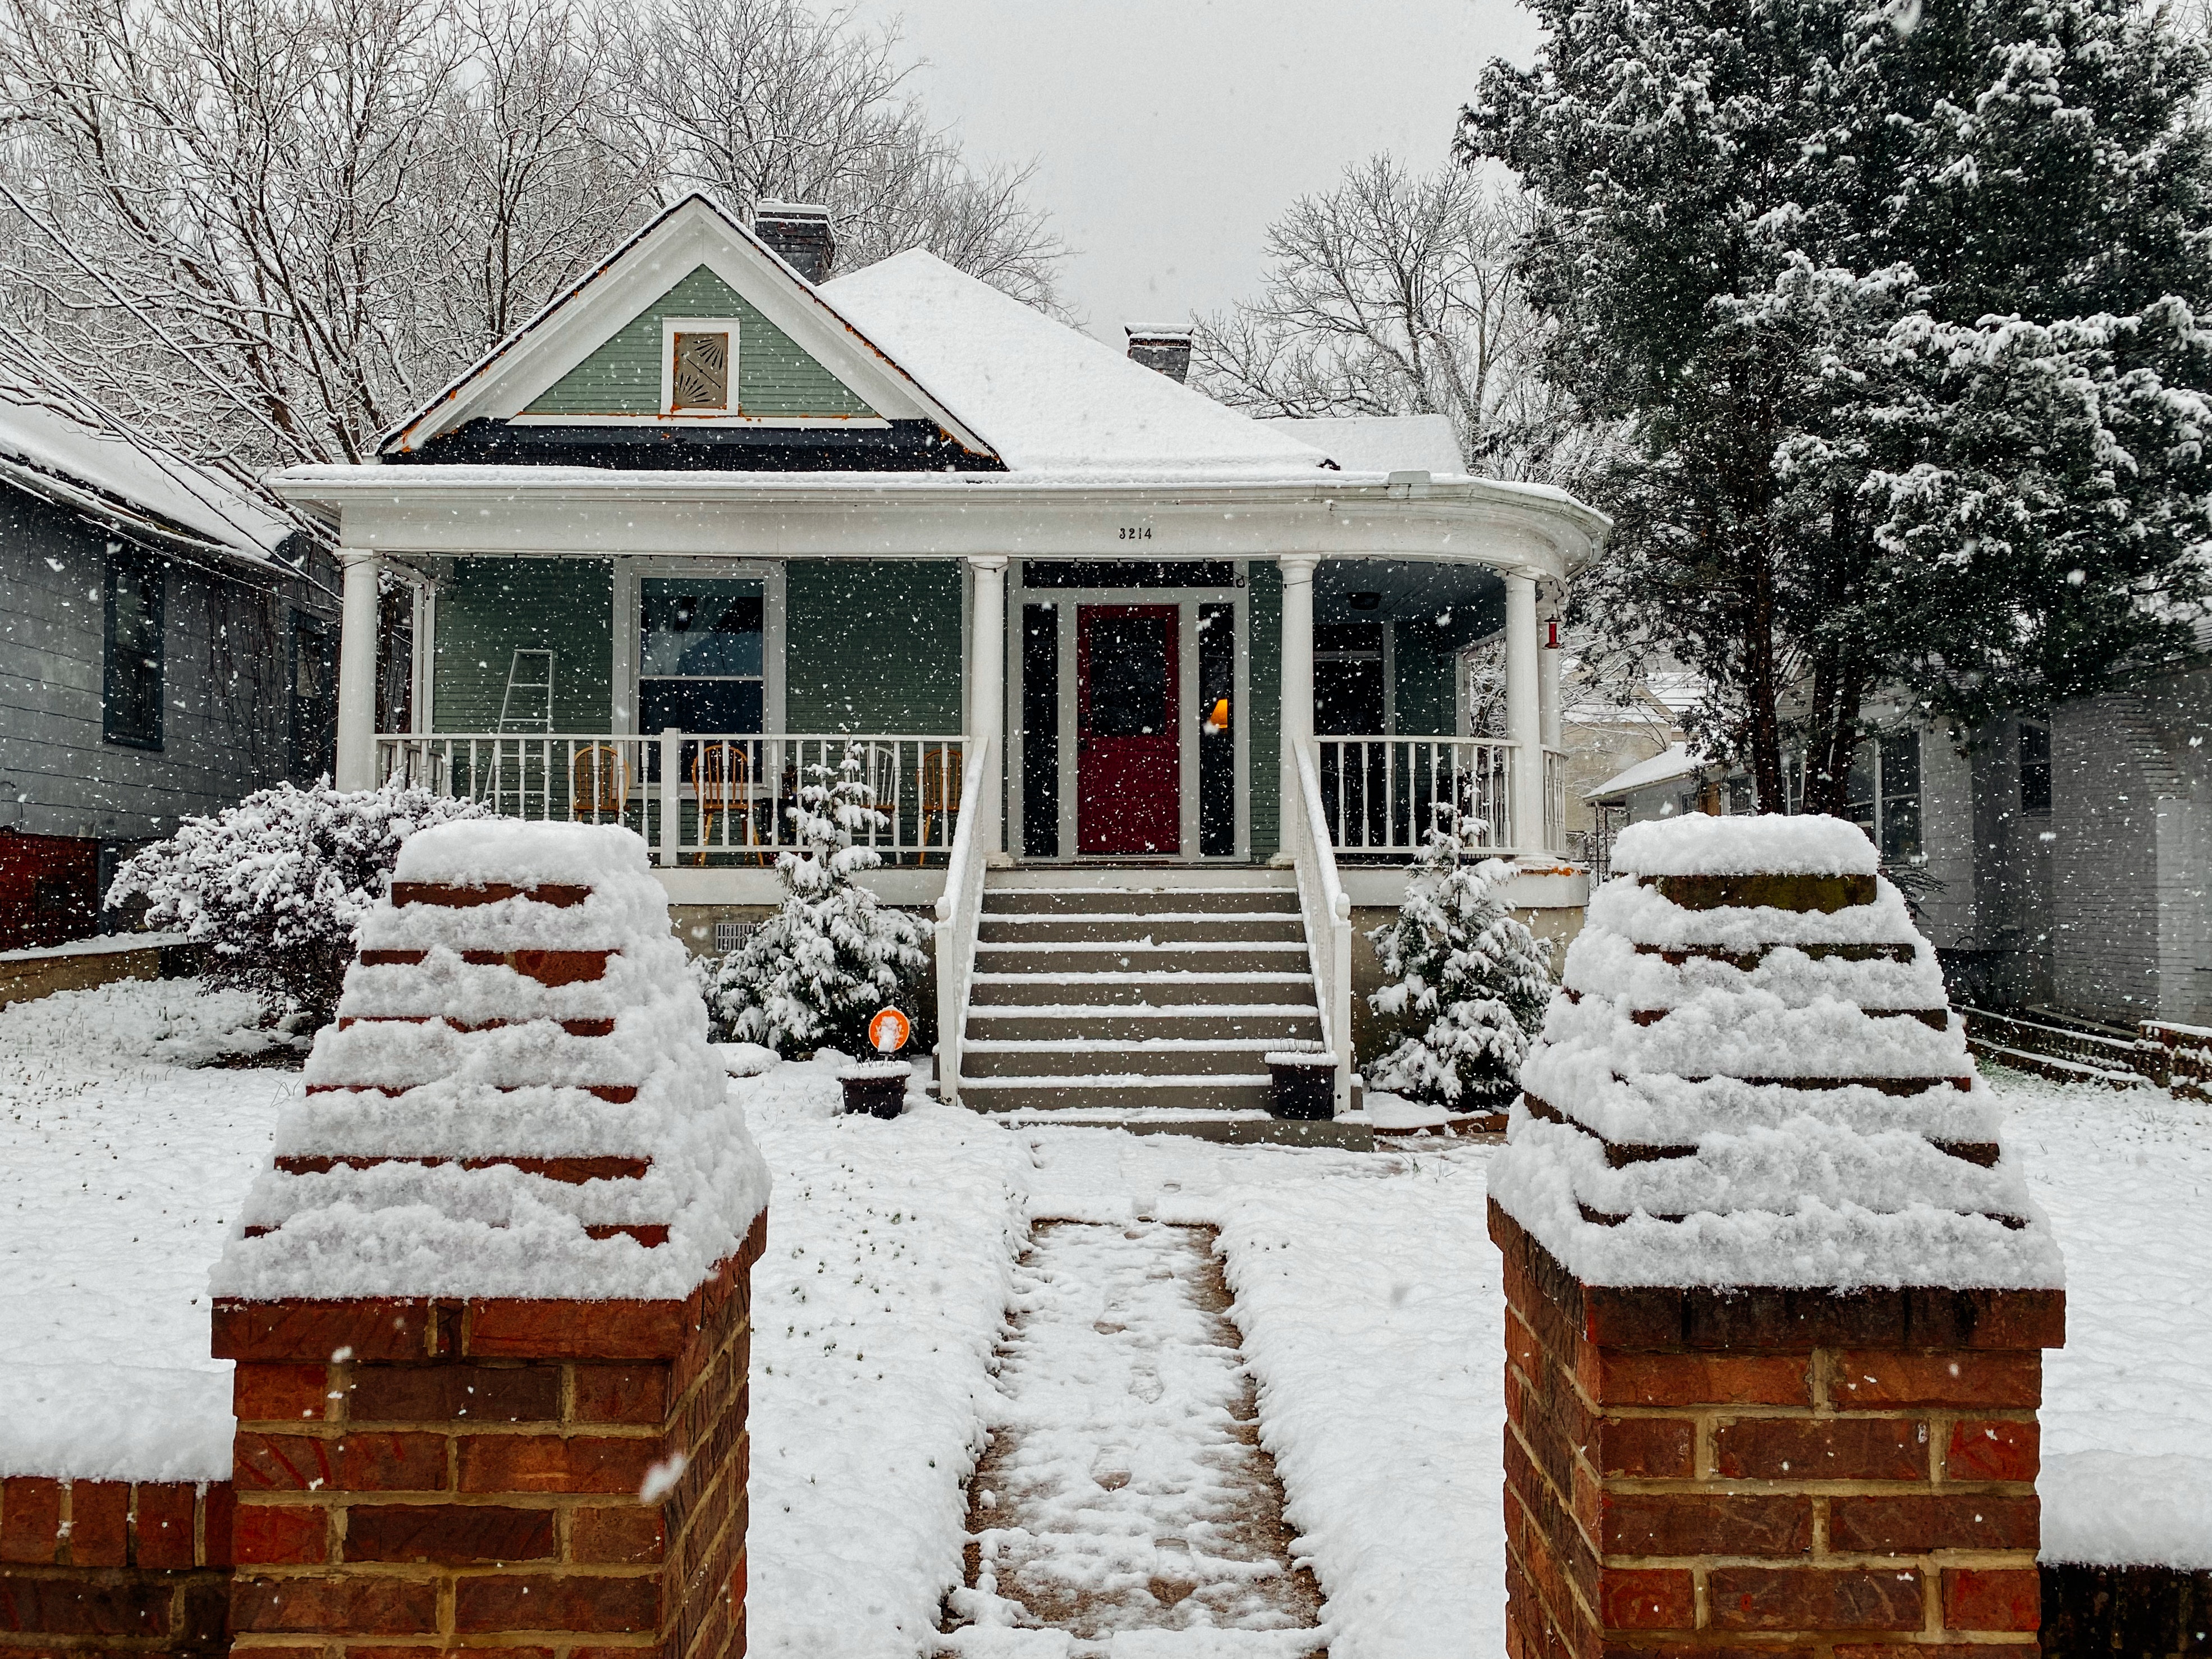 How cold weather effects your roof